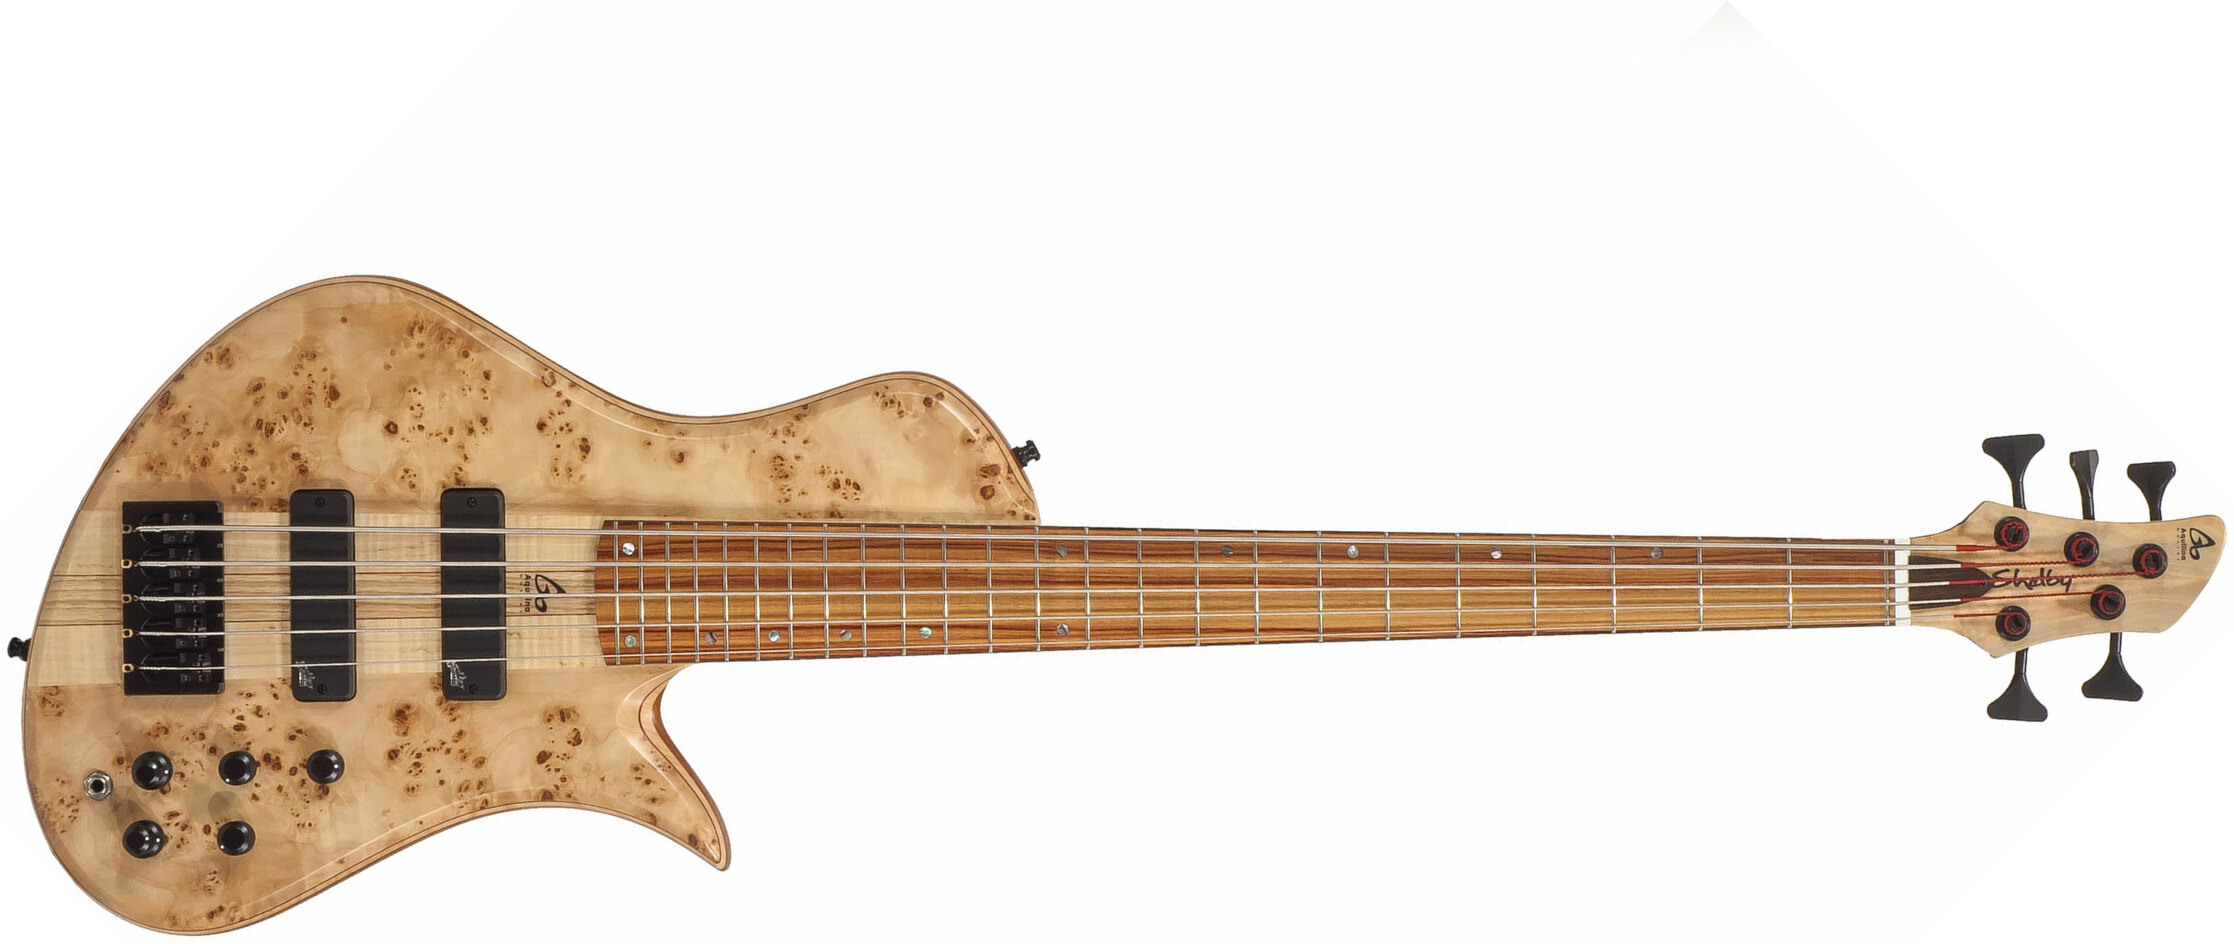 Aquilina Shelby Chambre Acoustique 5 Aulne/acajou Active J.east Rw #011855 - Natural - Solid body electric bass - Main picture